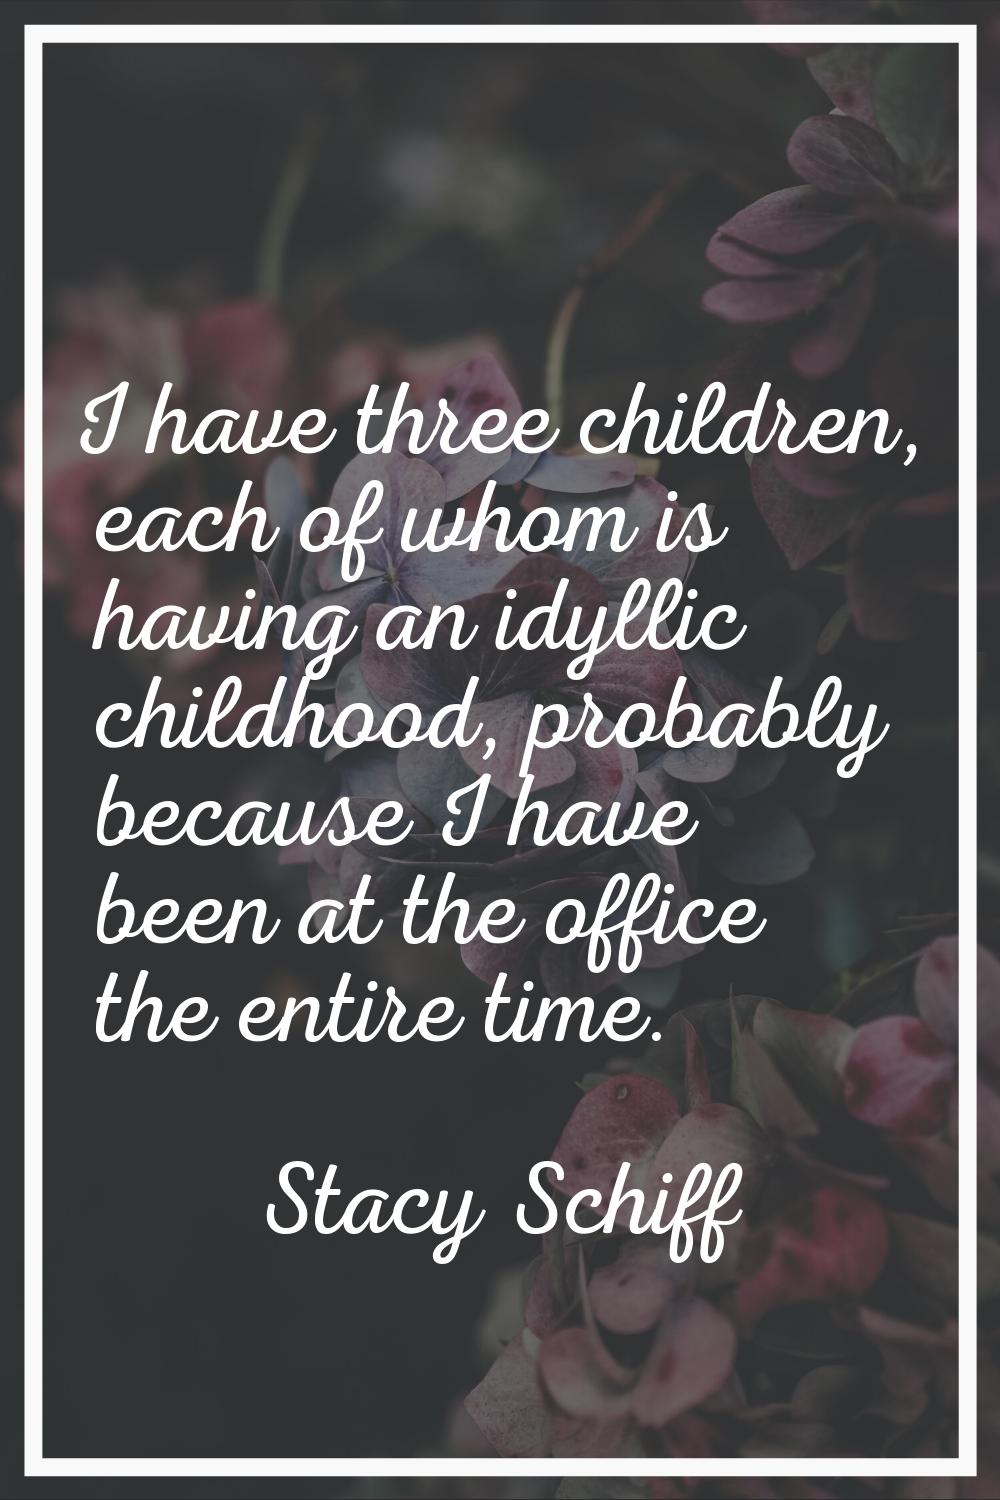 I have three children, each of whom is having an idyllic childhood, probably because I have been at